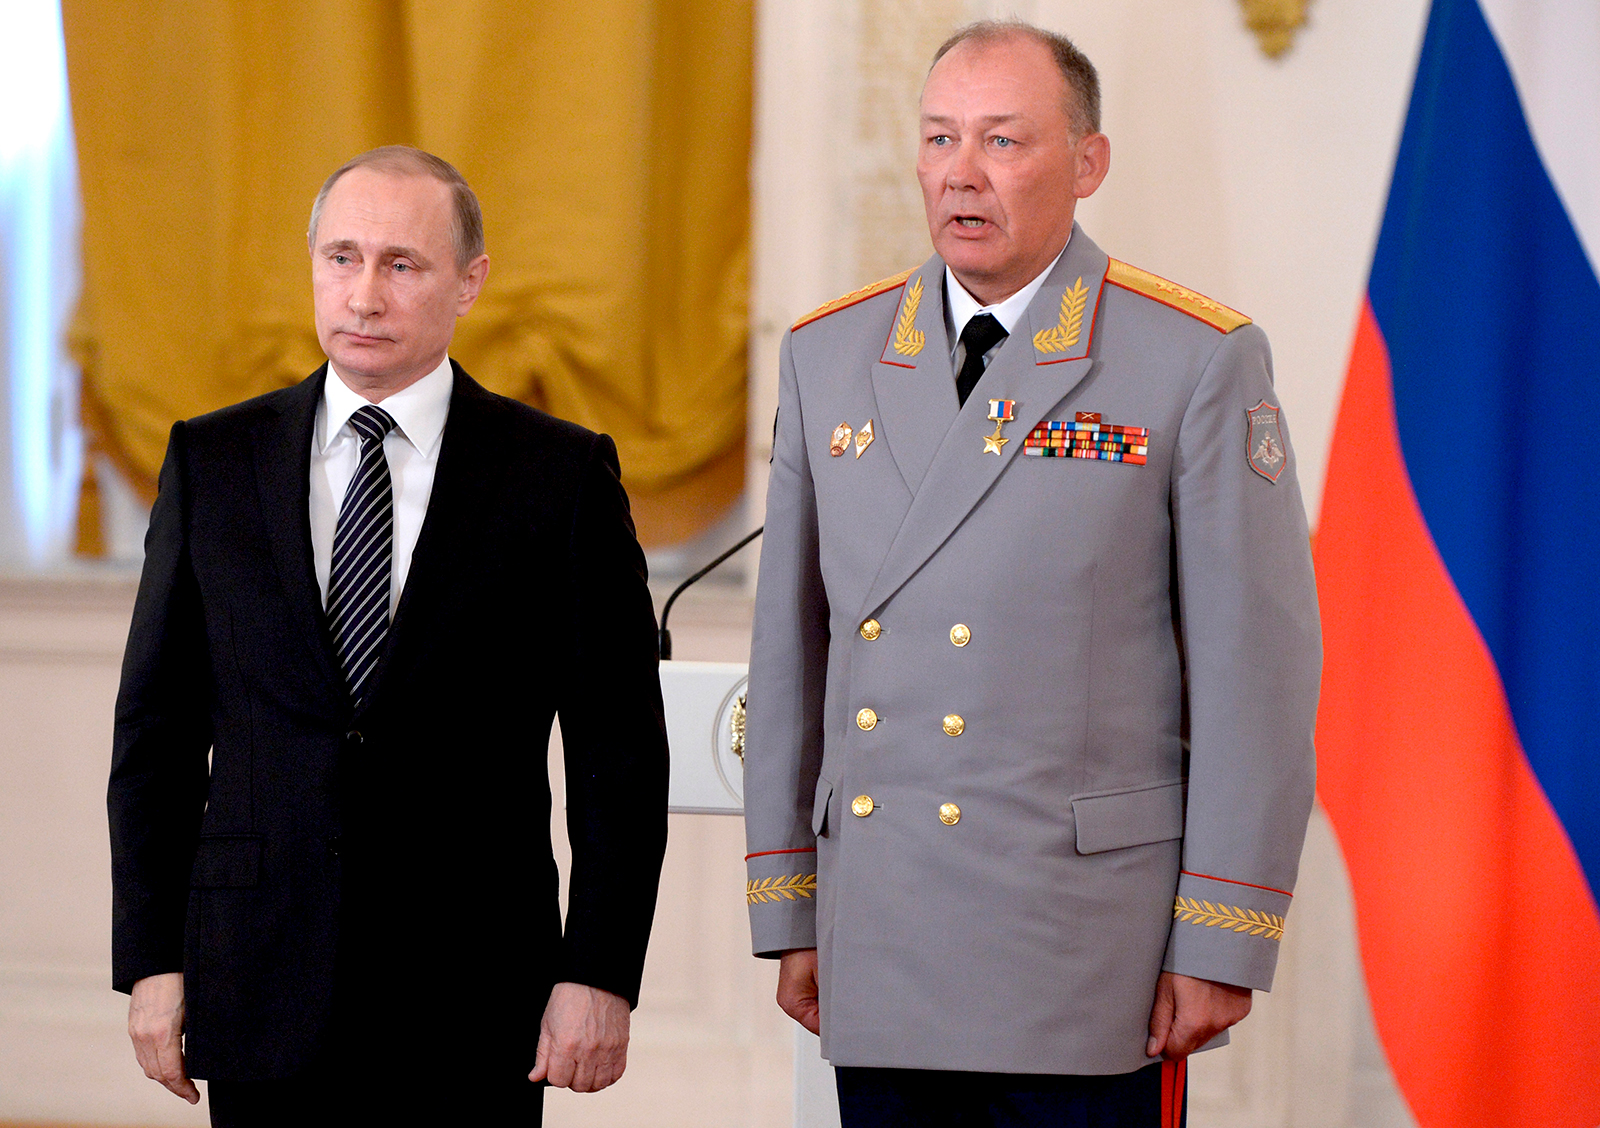 In this swimming pool photo taken on Thursday, March 17, 2016, Russian President Vladimir Putin, left, poses with General Alexander Dvornikov during an awards ceremony at the Kremlin in Moscow, Russia.